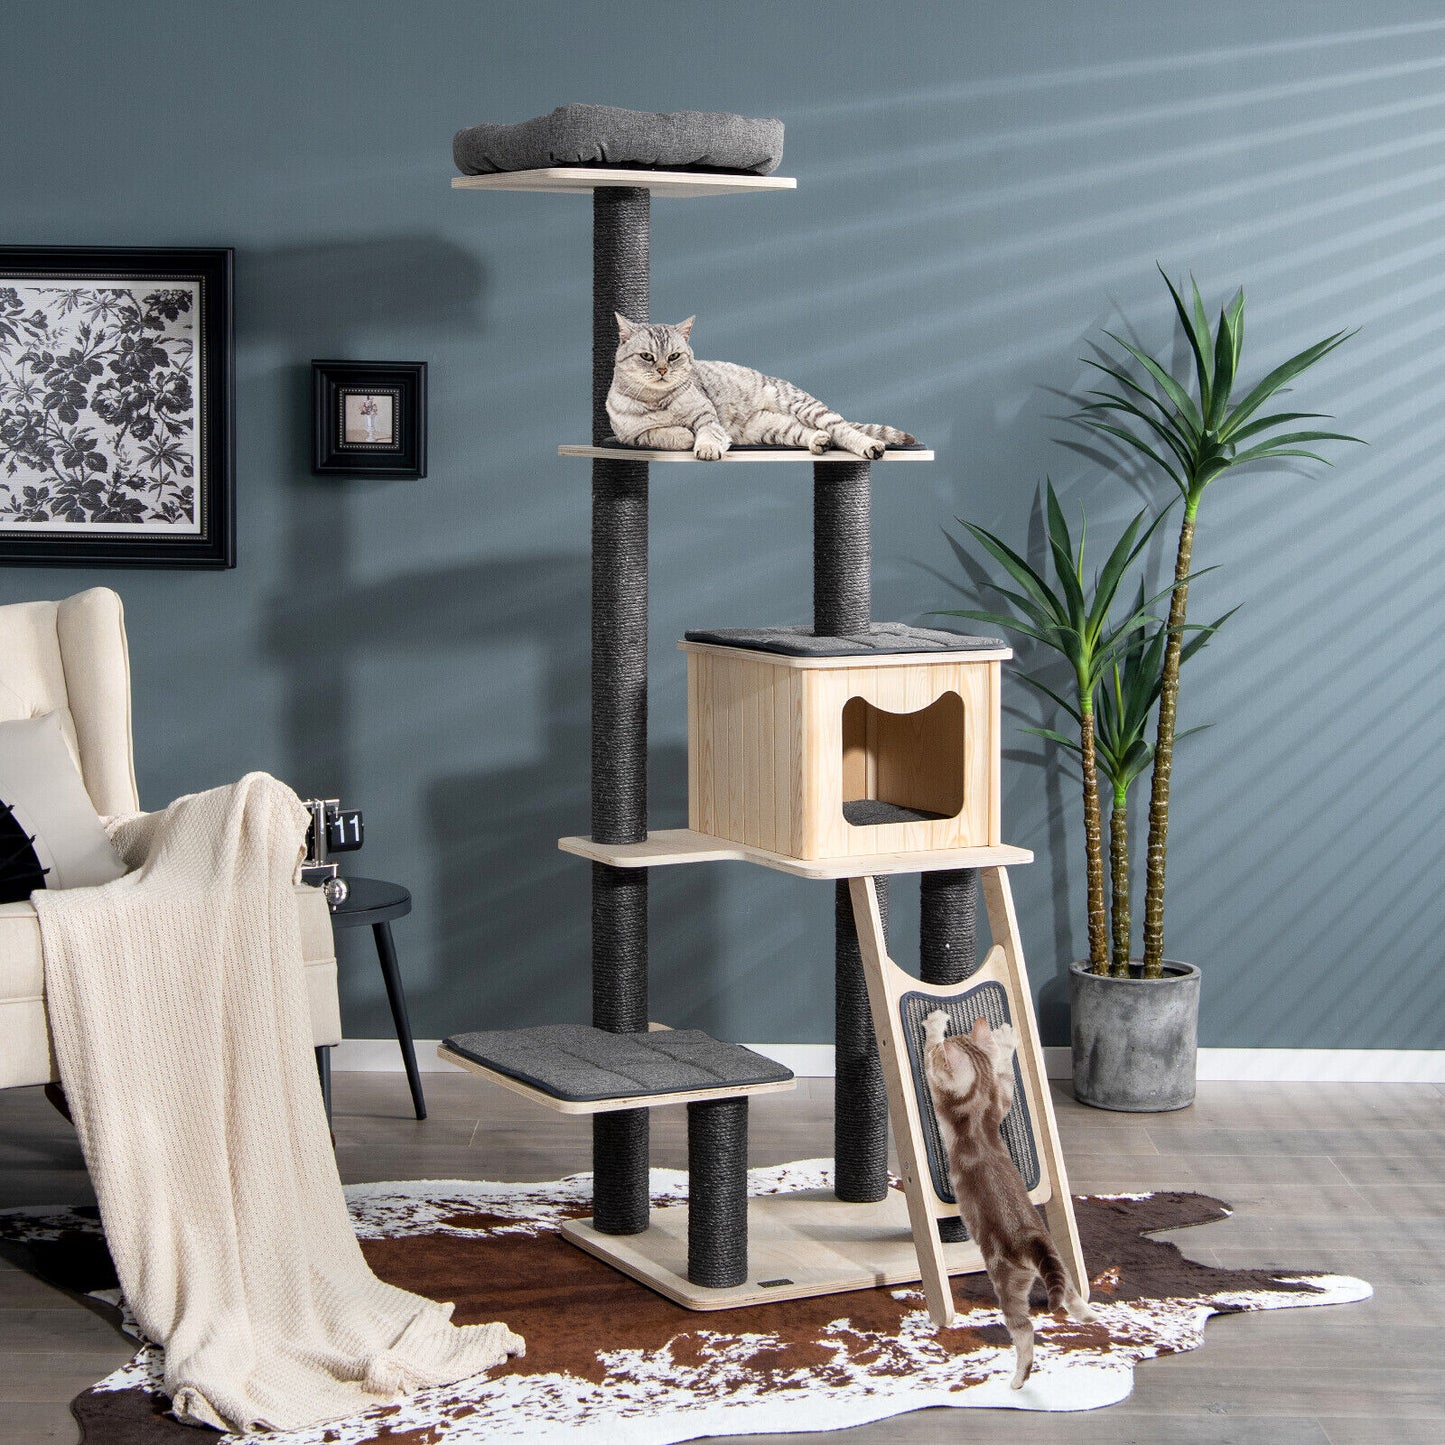 5-Tier Modern Wood Cat Tower with Washable Cushions-Gray